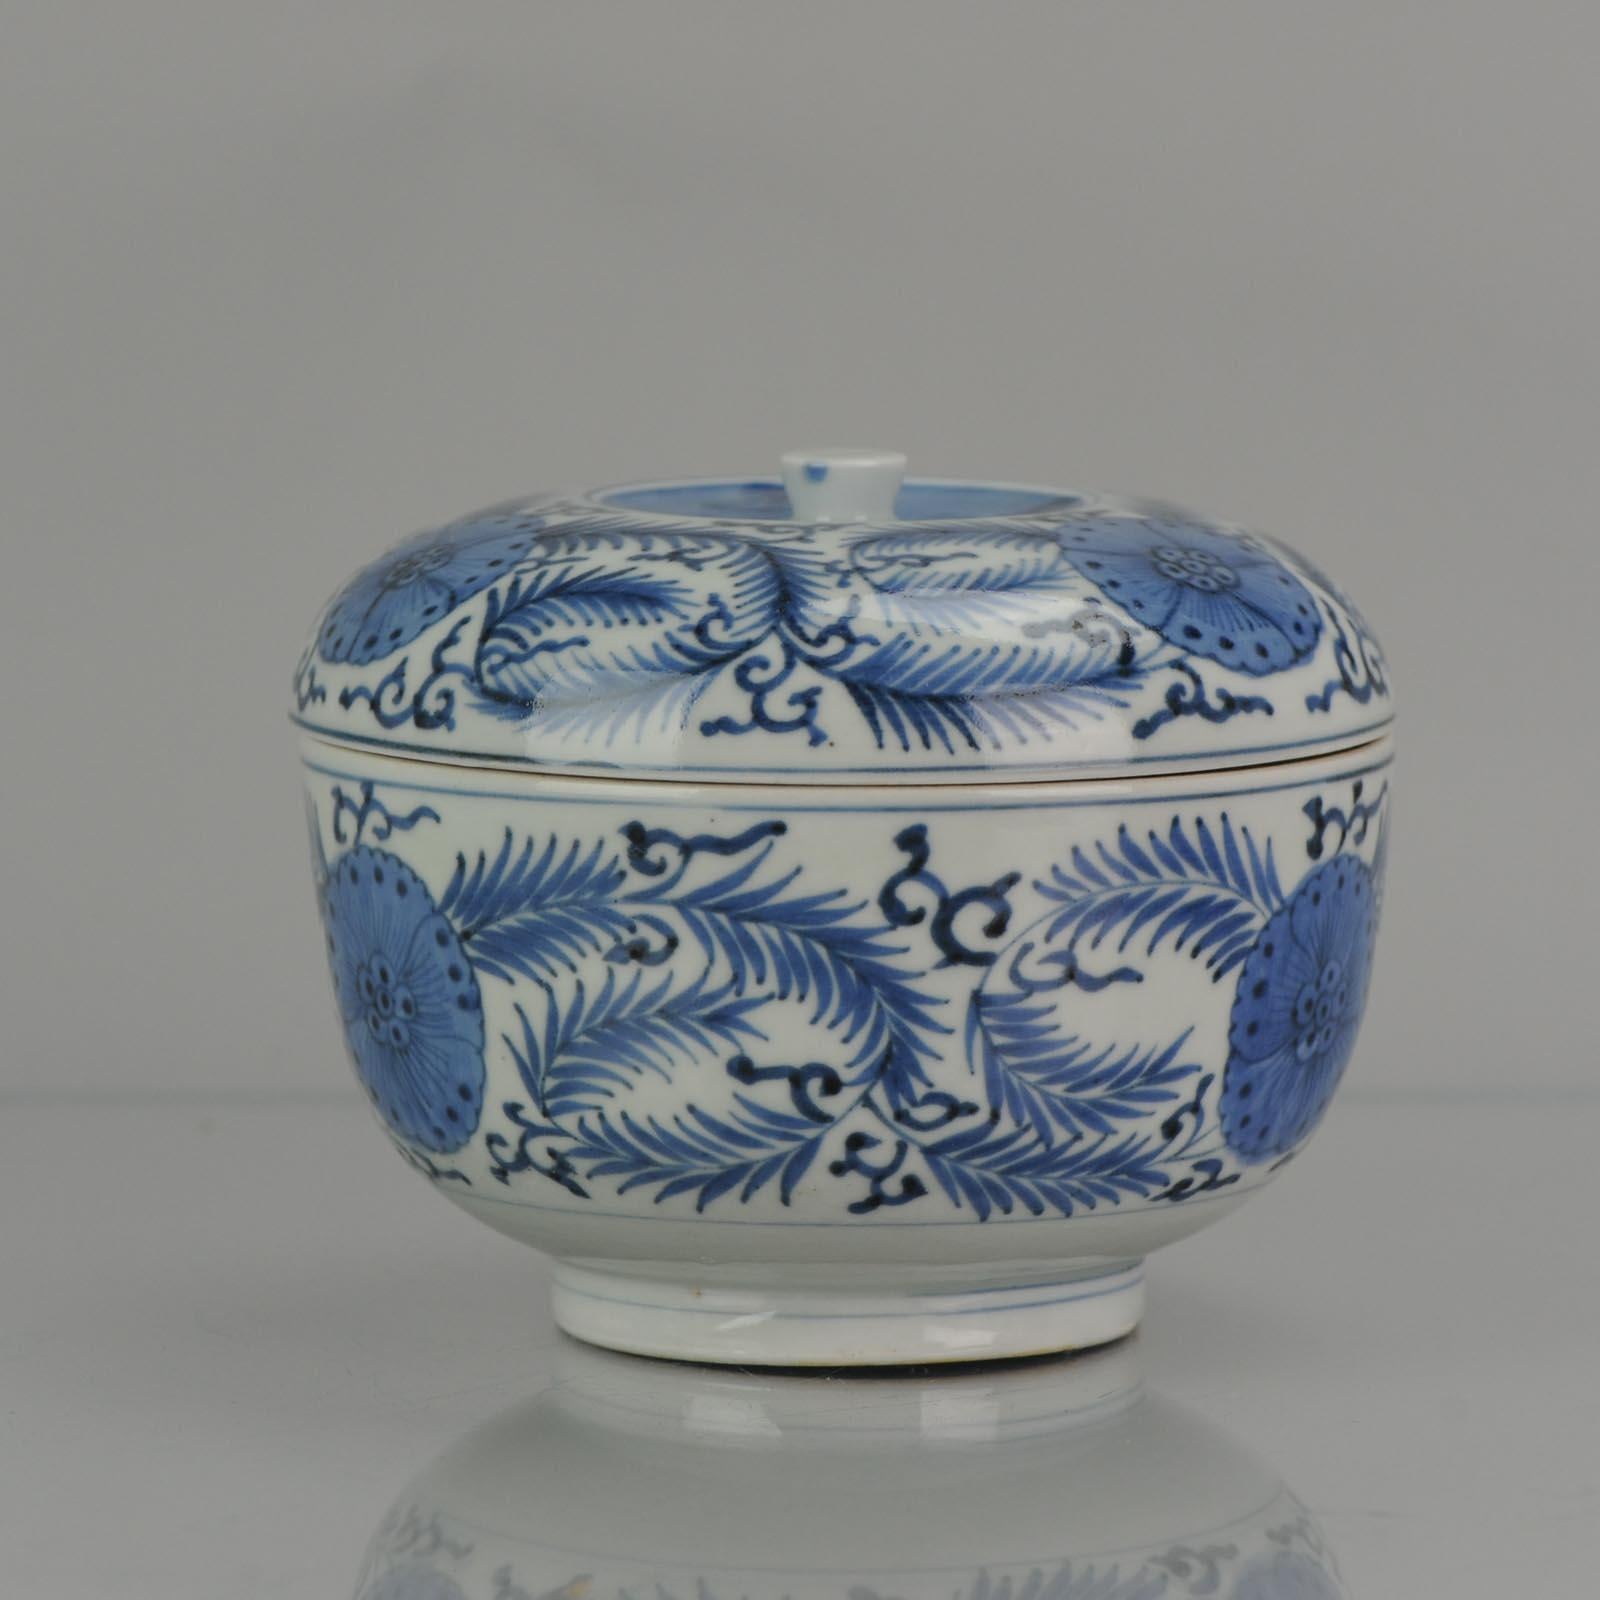 Large Edo Period 17-18th C Japanese Porcelain Arita Bowl Flowers and Branches 1